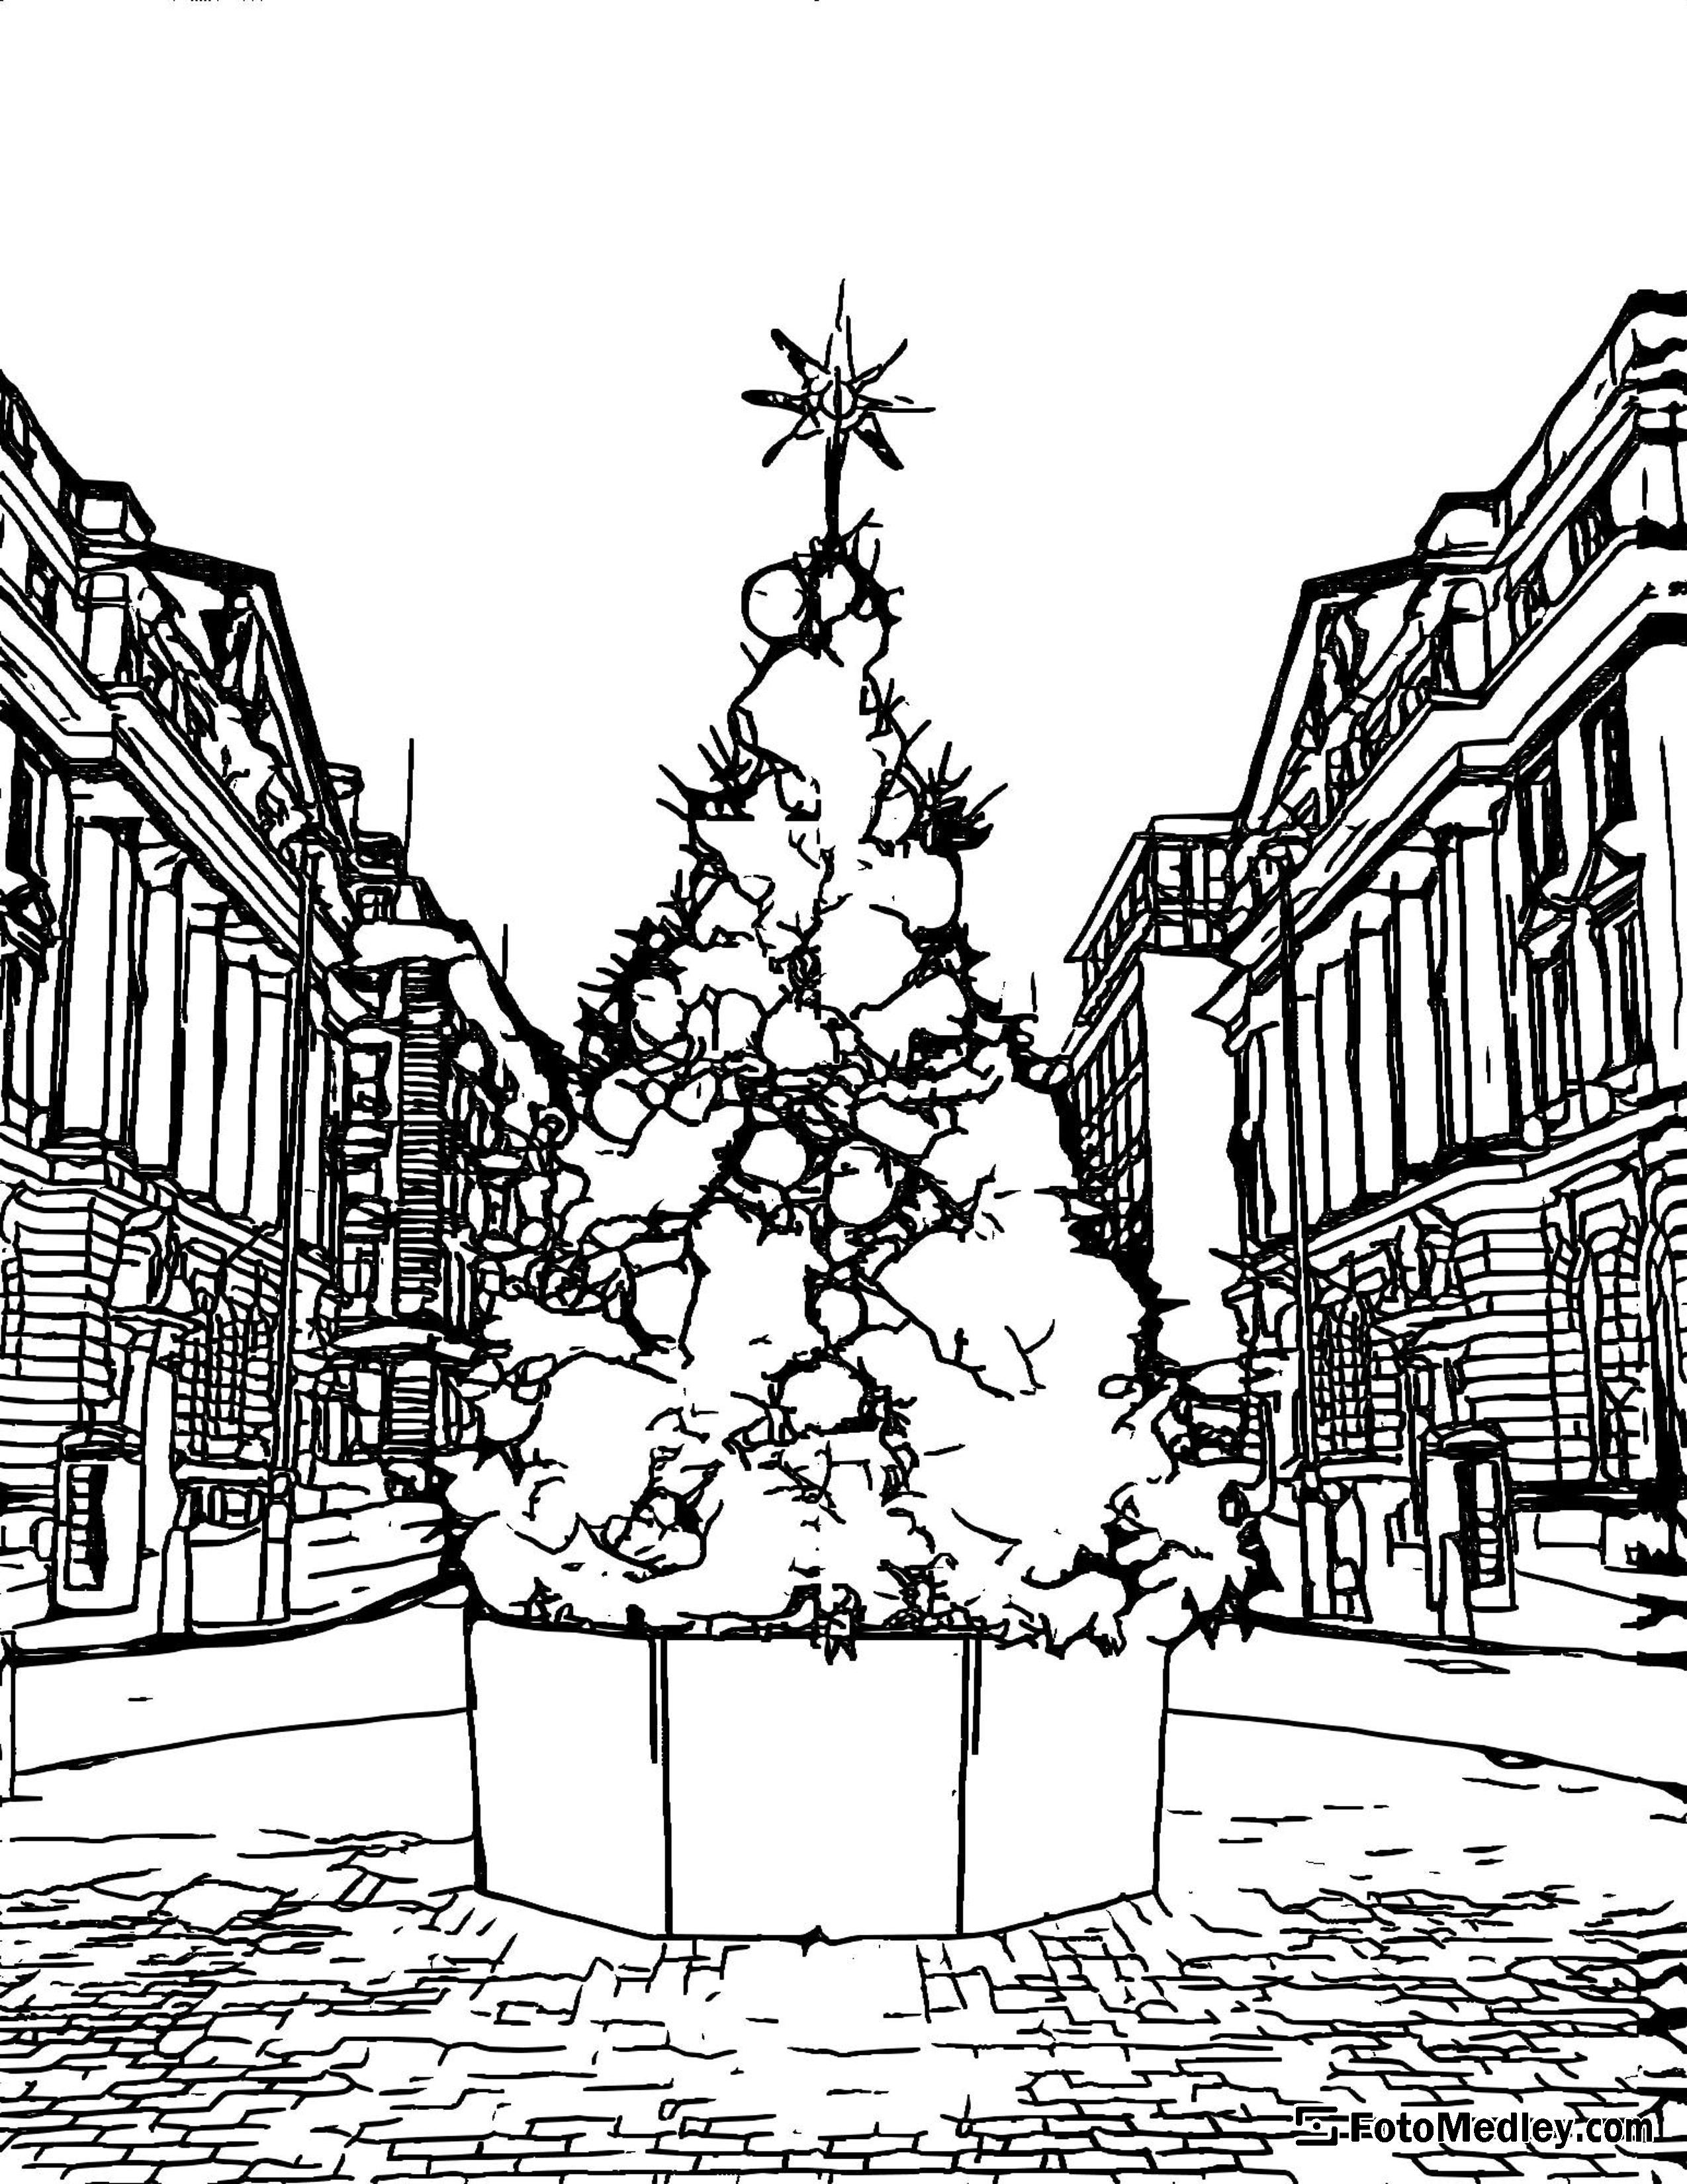 A coloring page of a Christmas tree at the center of a town square, with buildings in the background.